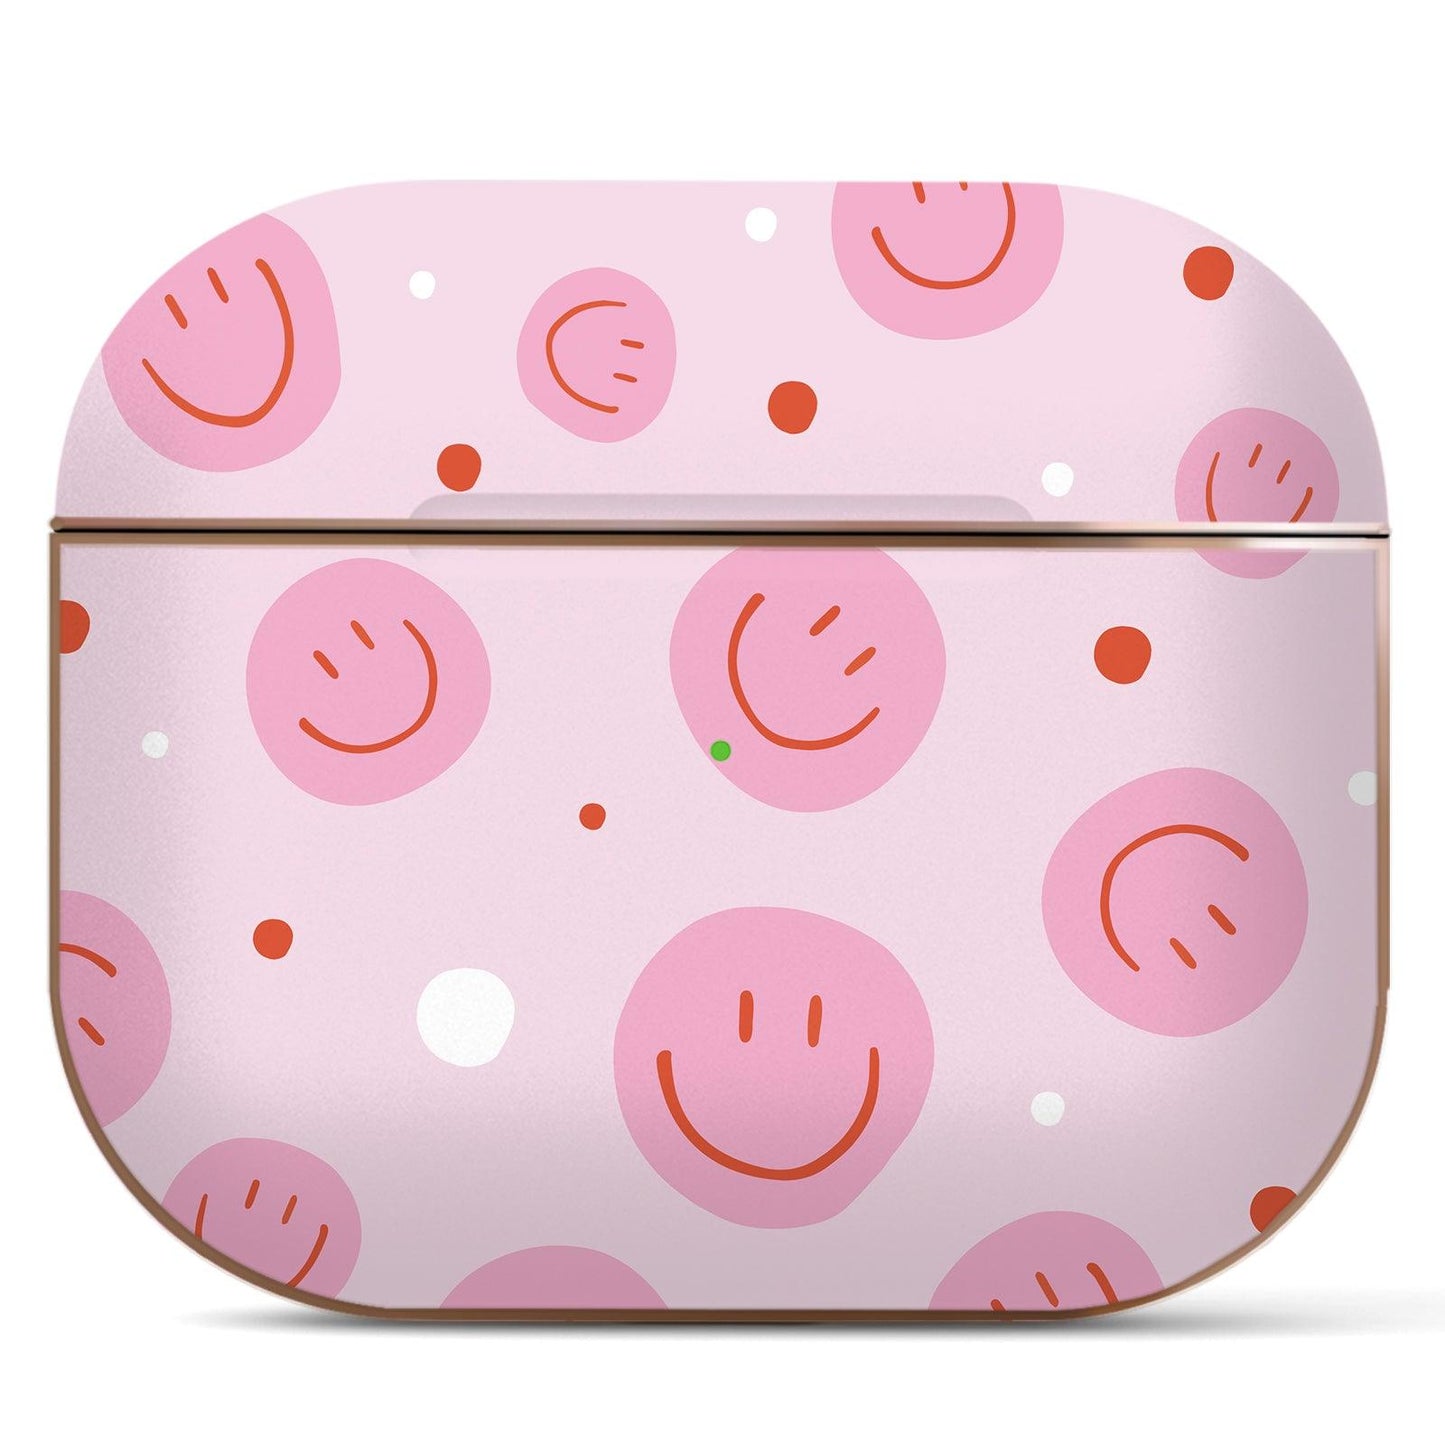 AirPods Pro 1st Generation Contemporary Cover, Pink Smiley - Berkin Arts